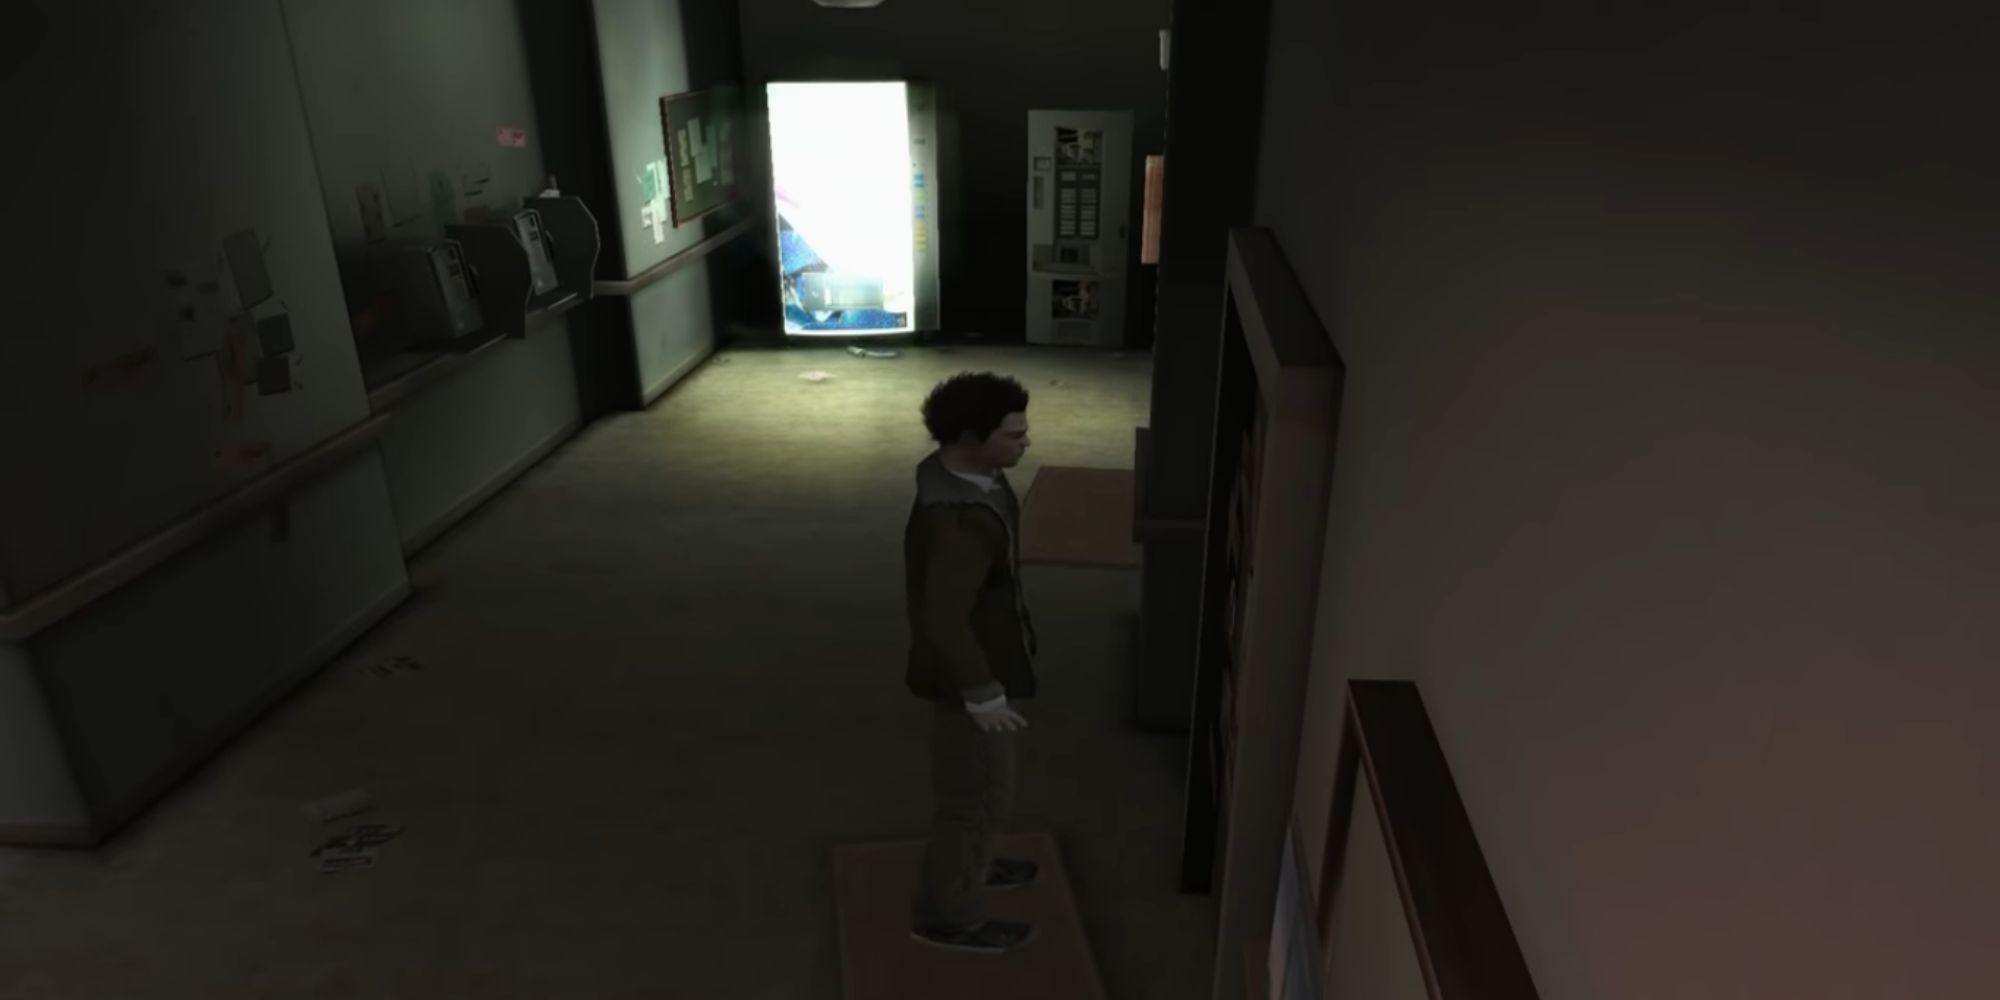 A man tries to use a vending machine in a dark hallway in obscure the aftermath